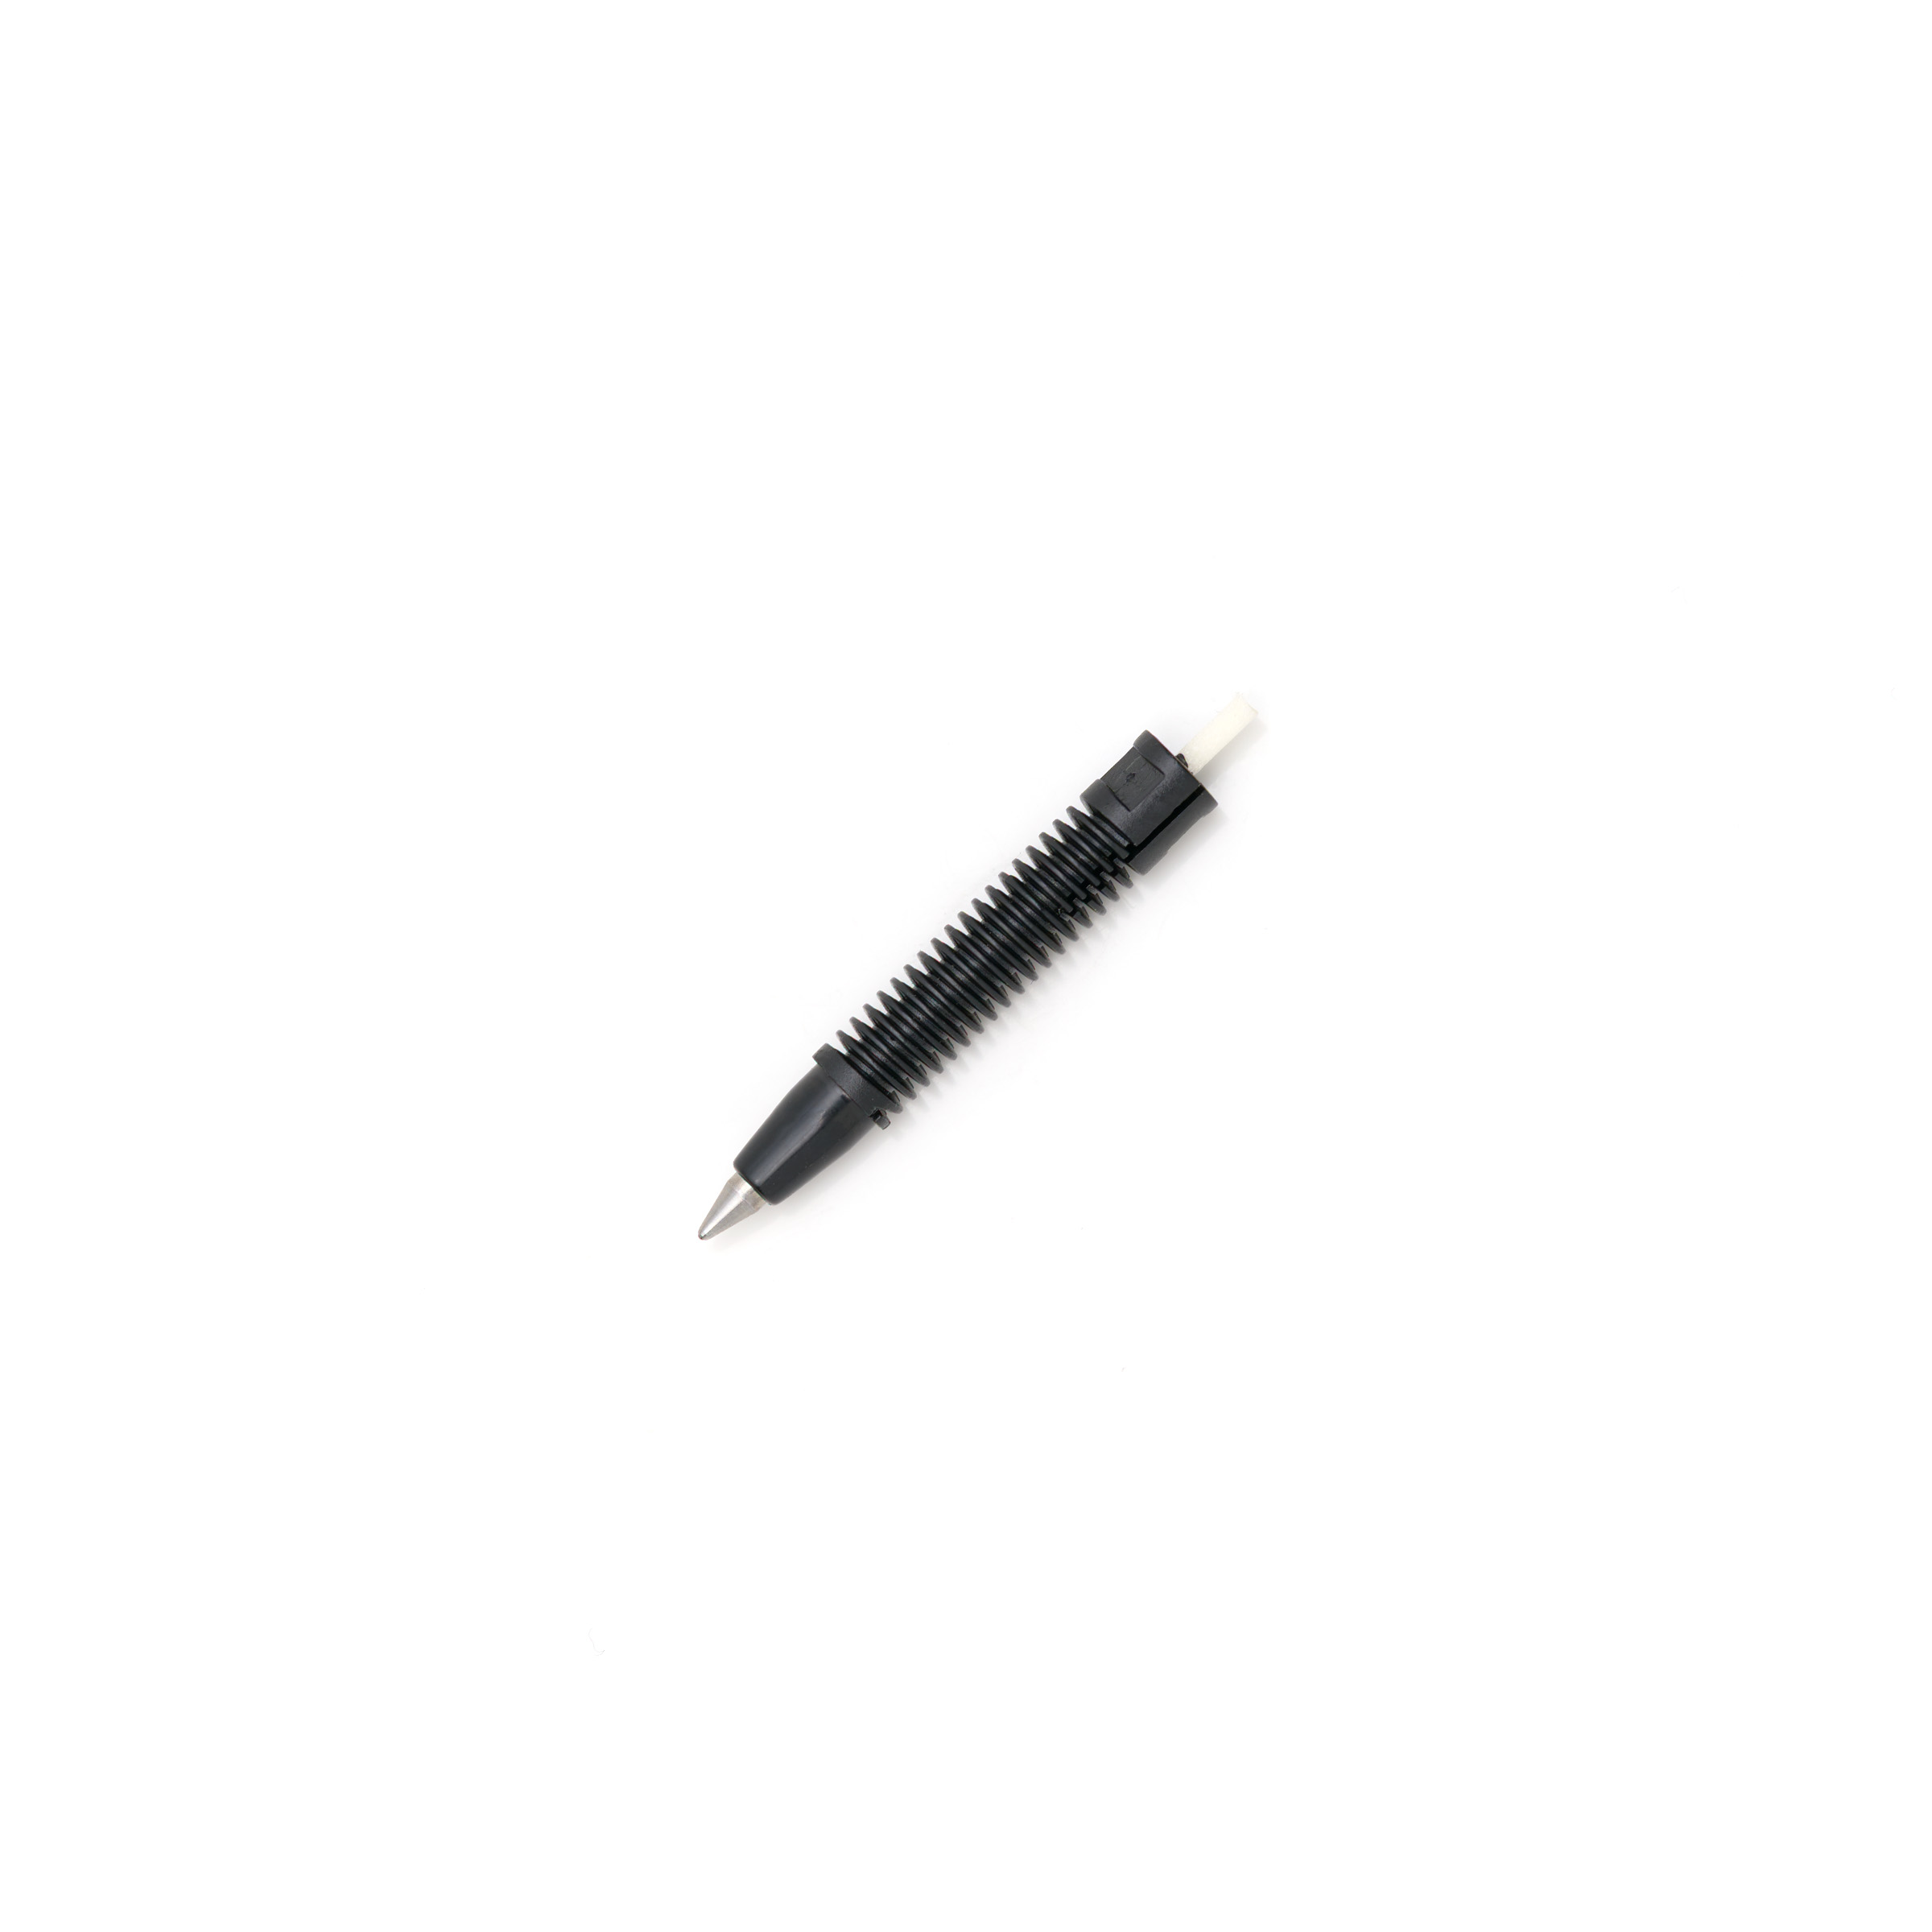 SUPER5 iR Ink Rollerball Pen M <br>Writing Tip with Assembly Aid